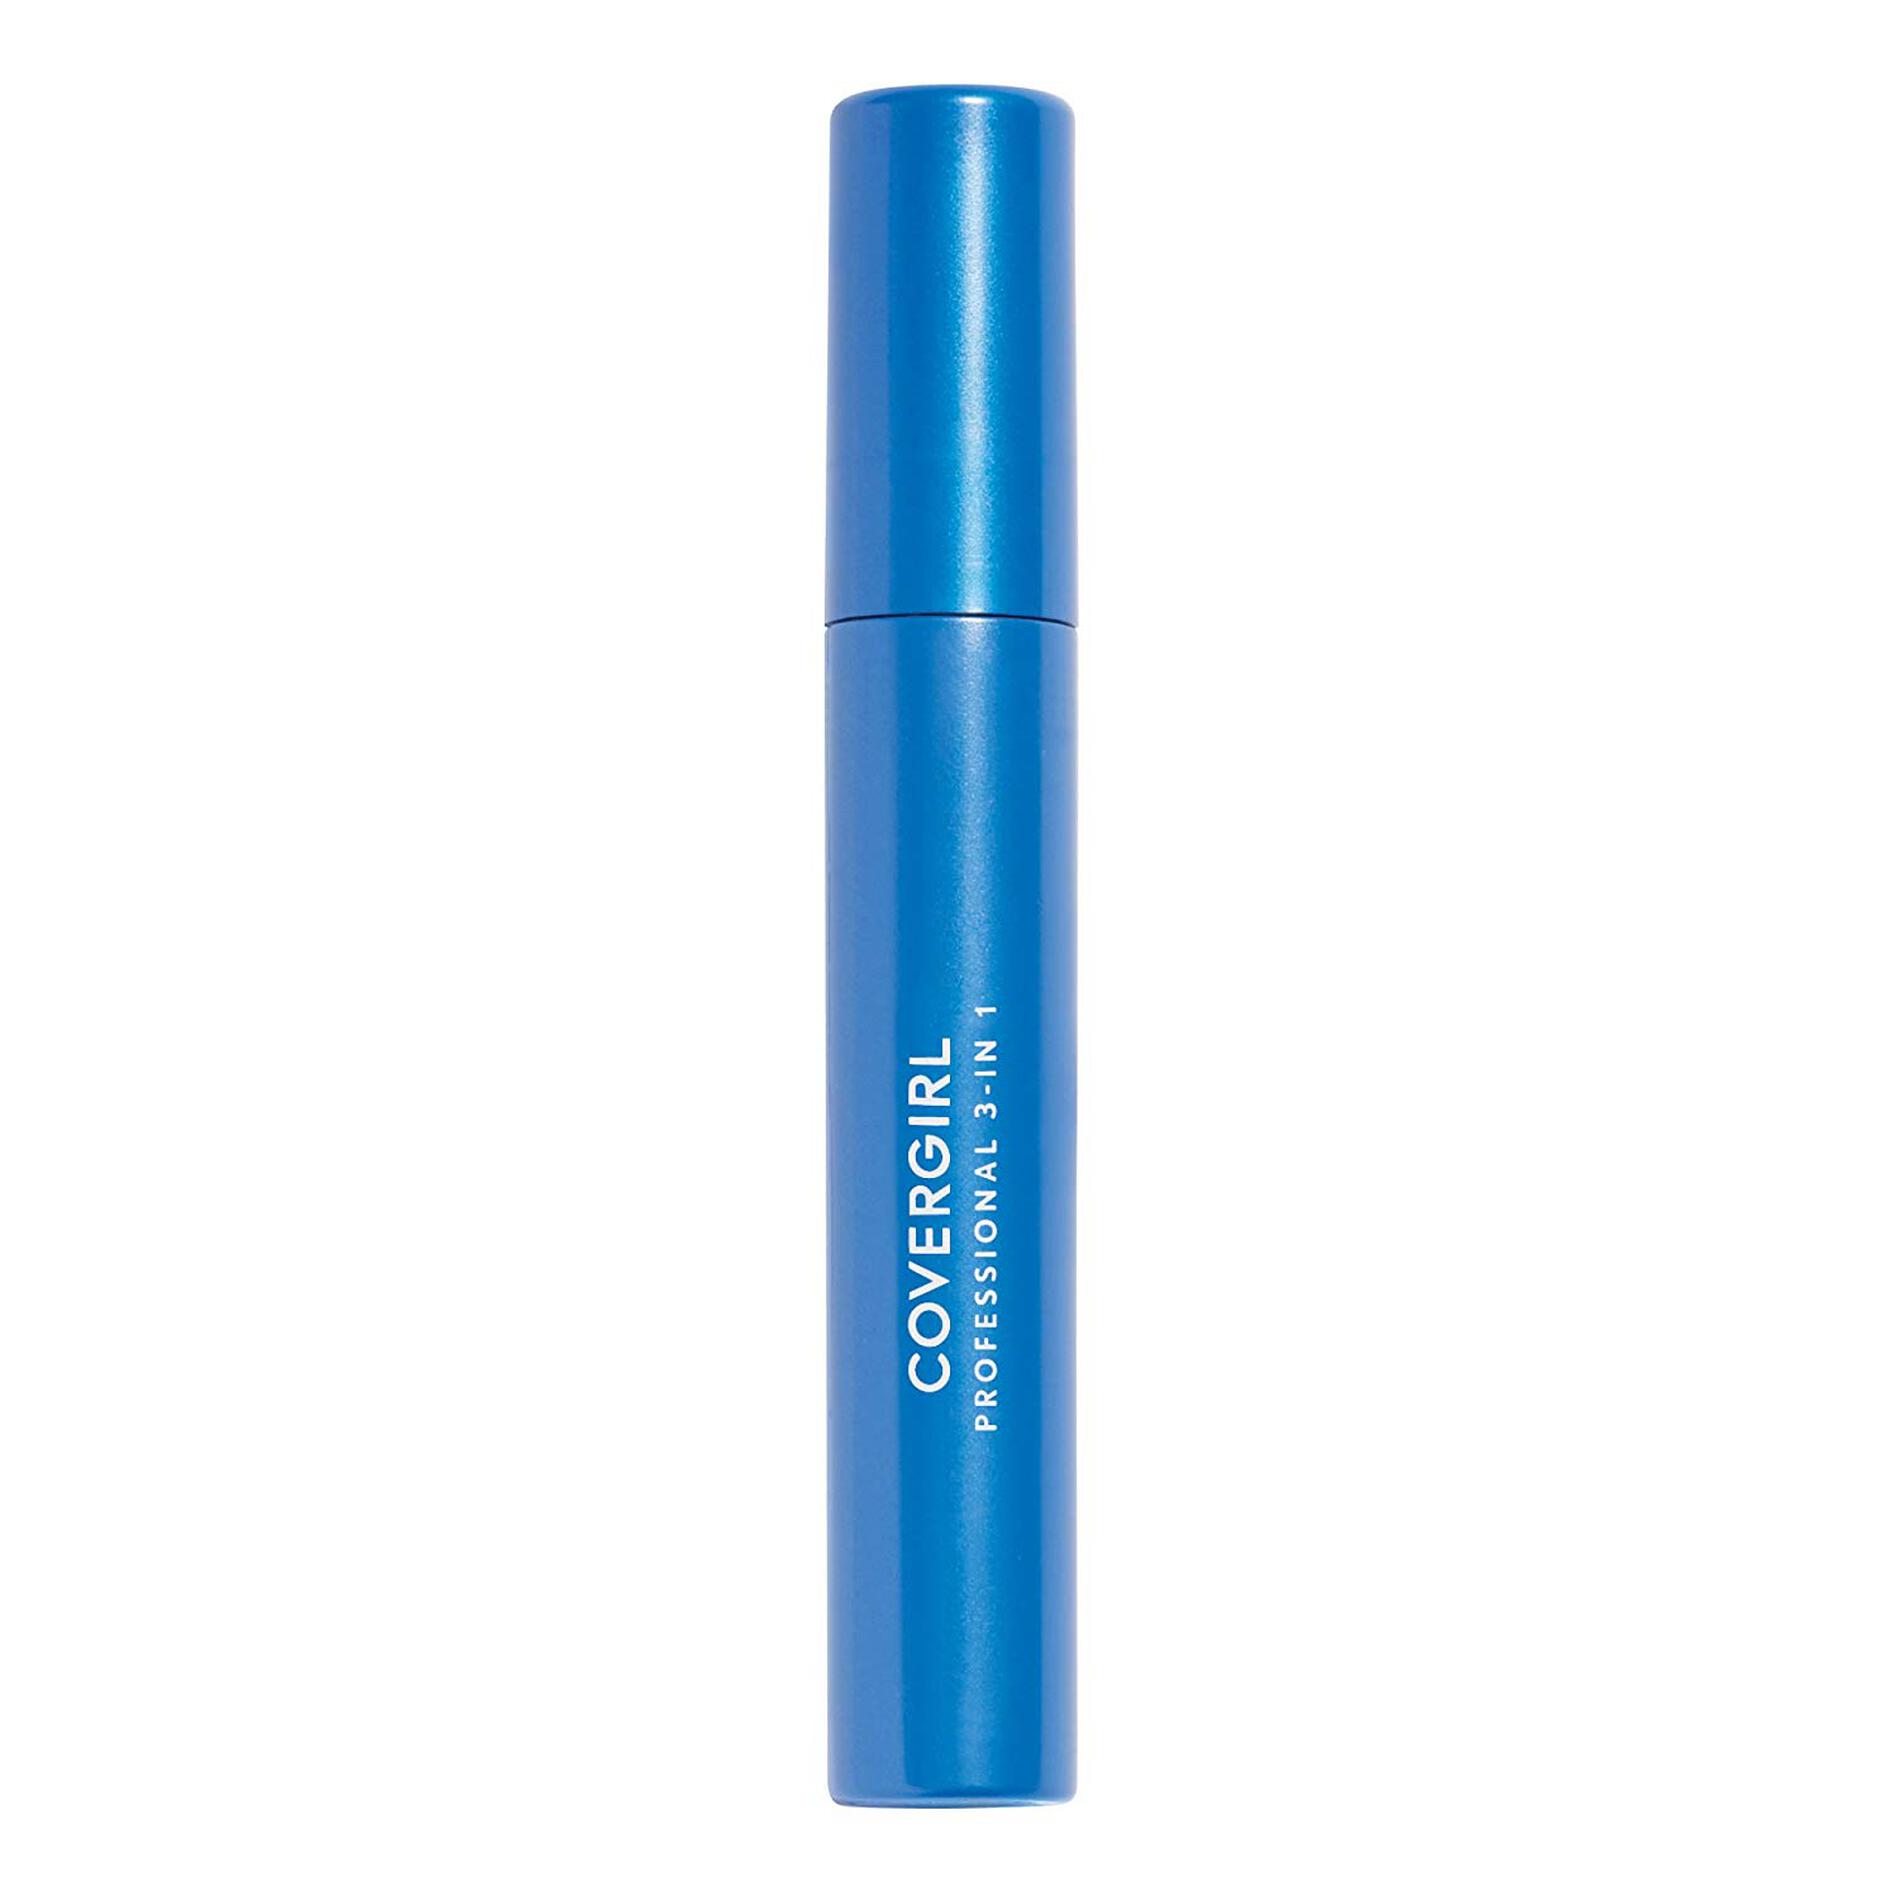 Covergirl All In One Curved Brush Mascara